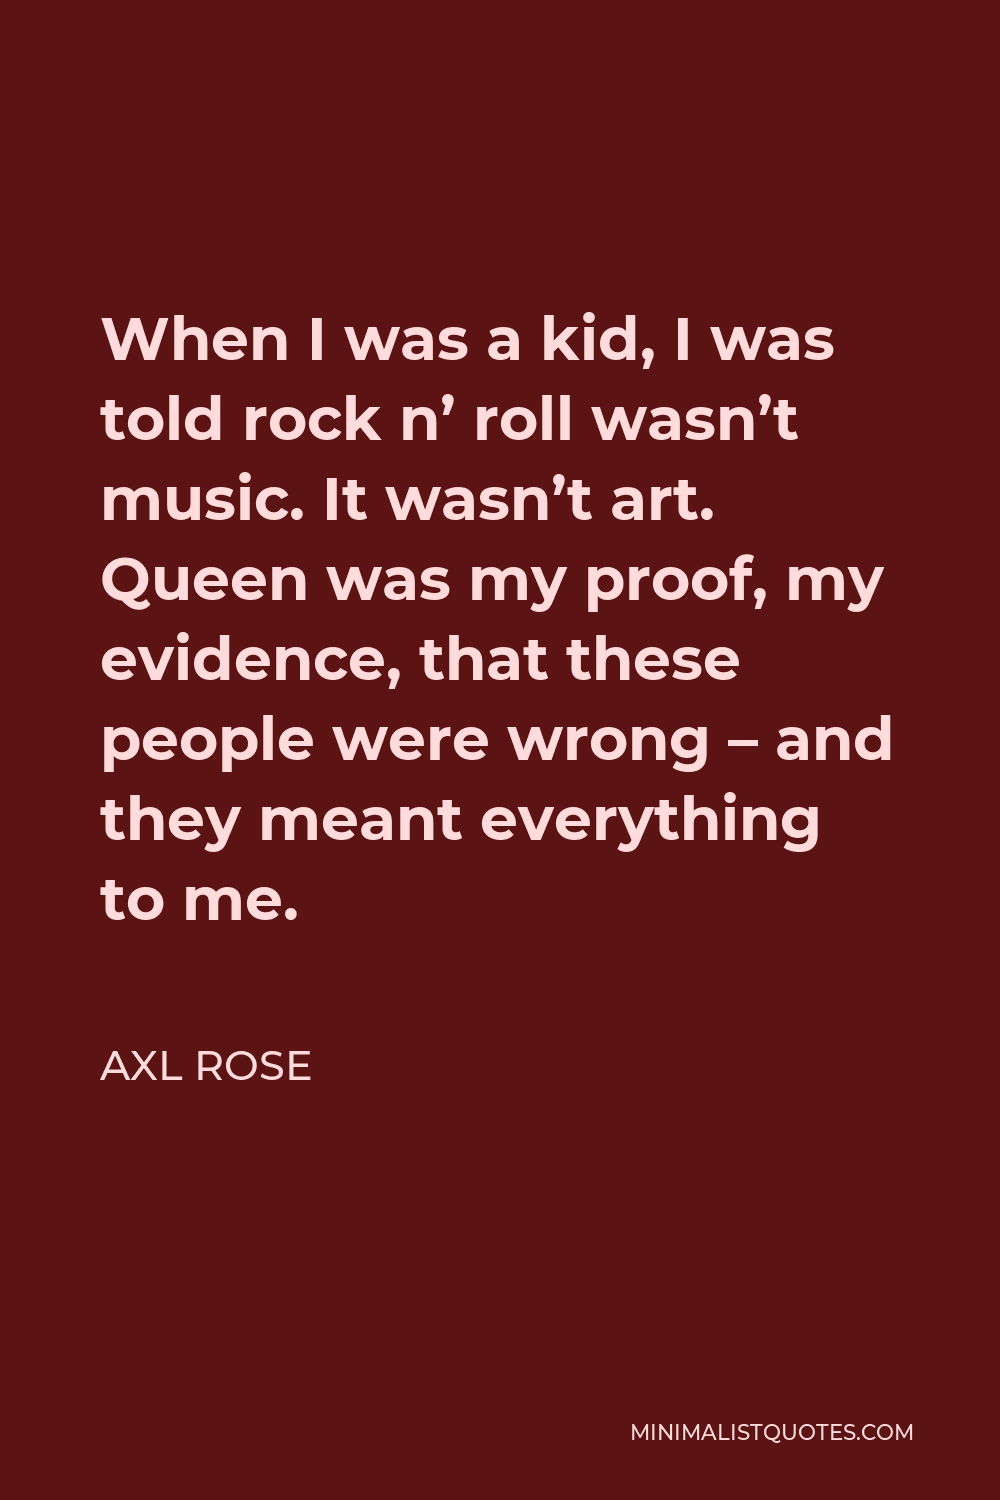 Axl Rose Quote - When I was a kid, I was told rock n’ roll wasn’t music. It wasn’t art. Queen was my proof, my evidence, that these people were wrong – and they meant everything to me.